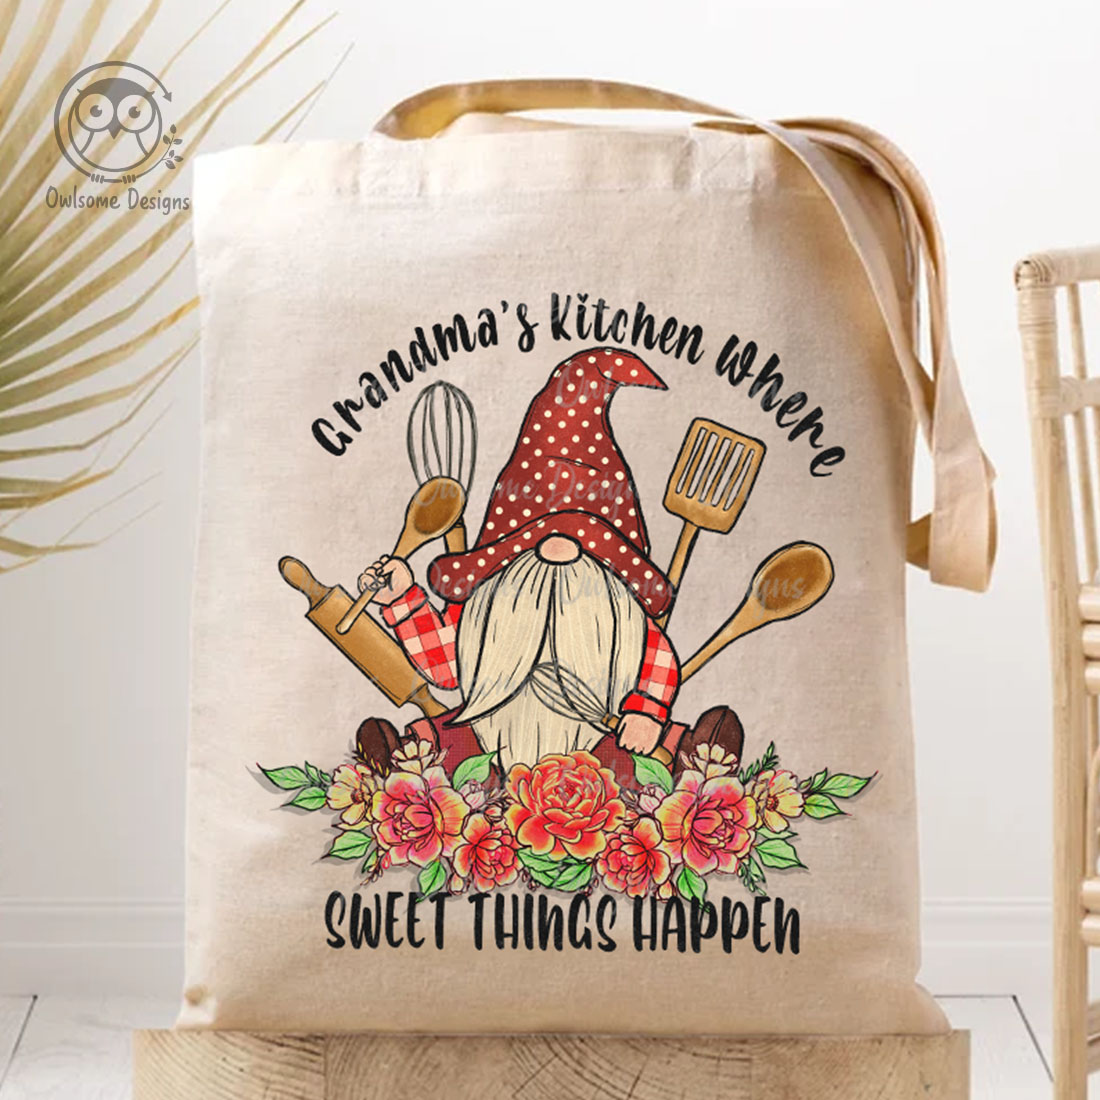 Image of a bag with a beautiful print of a gnome with kitchen accessories.